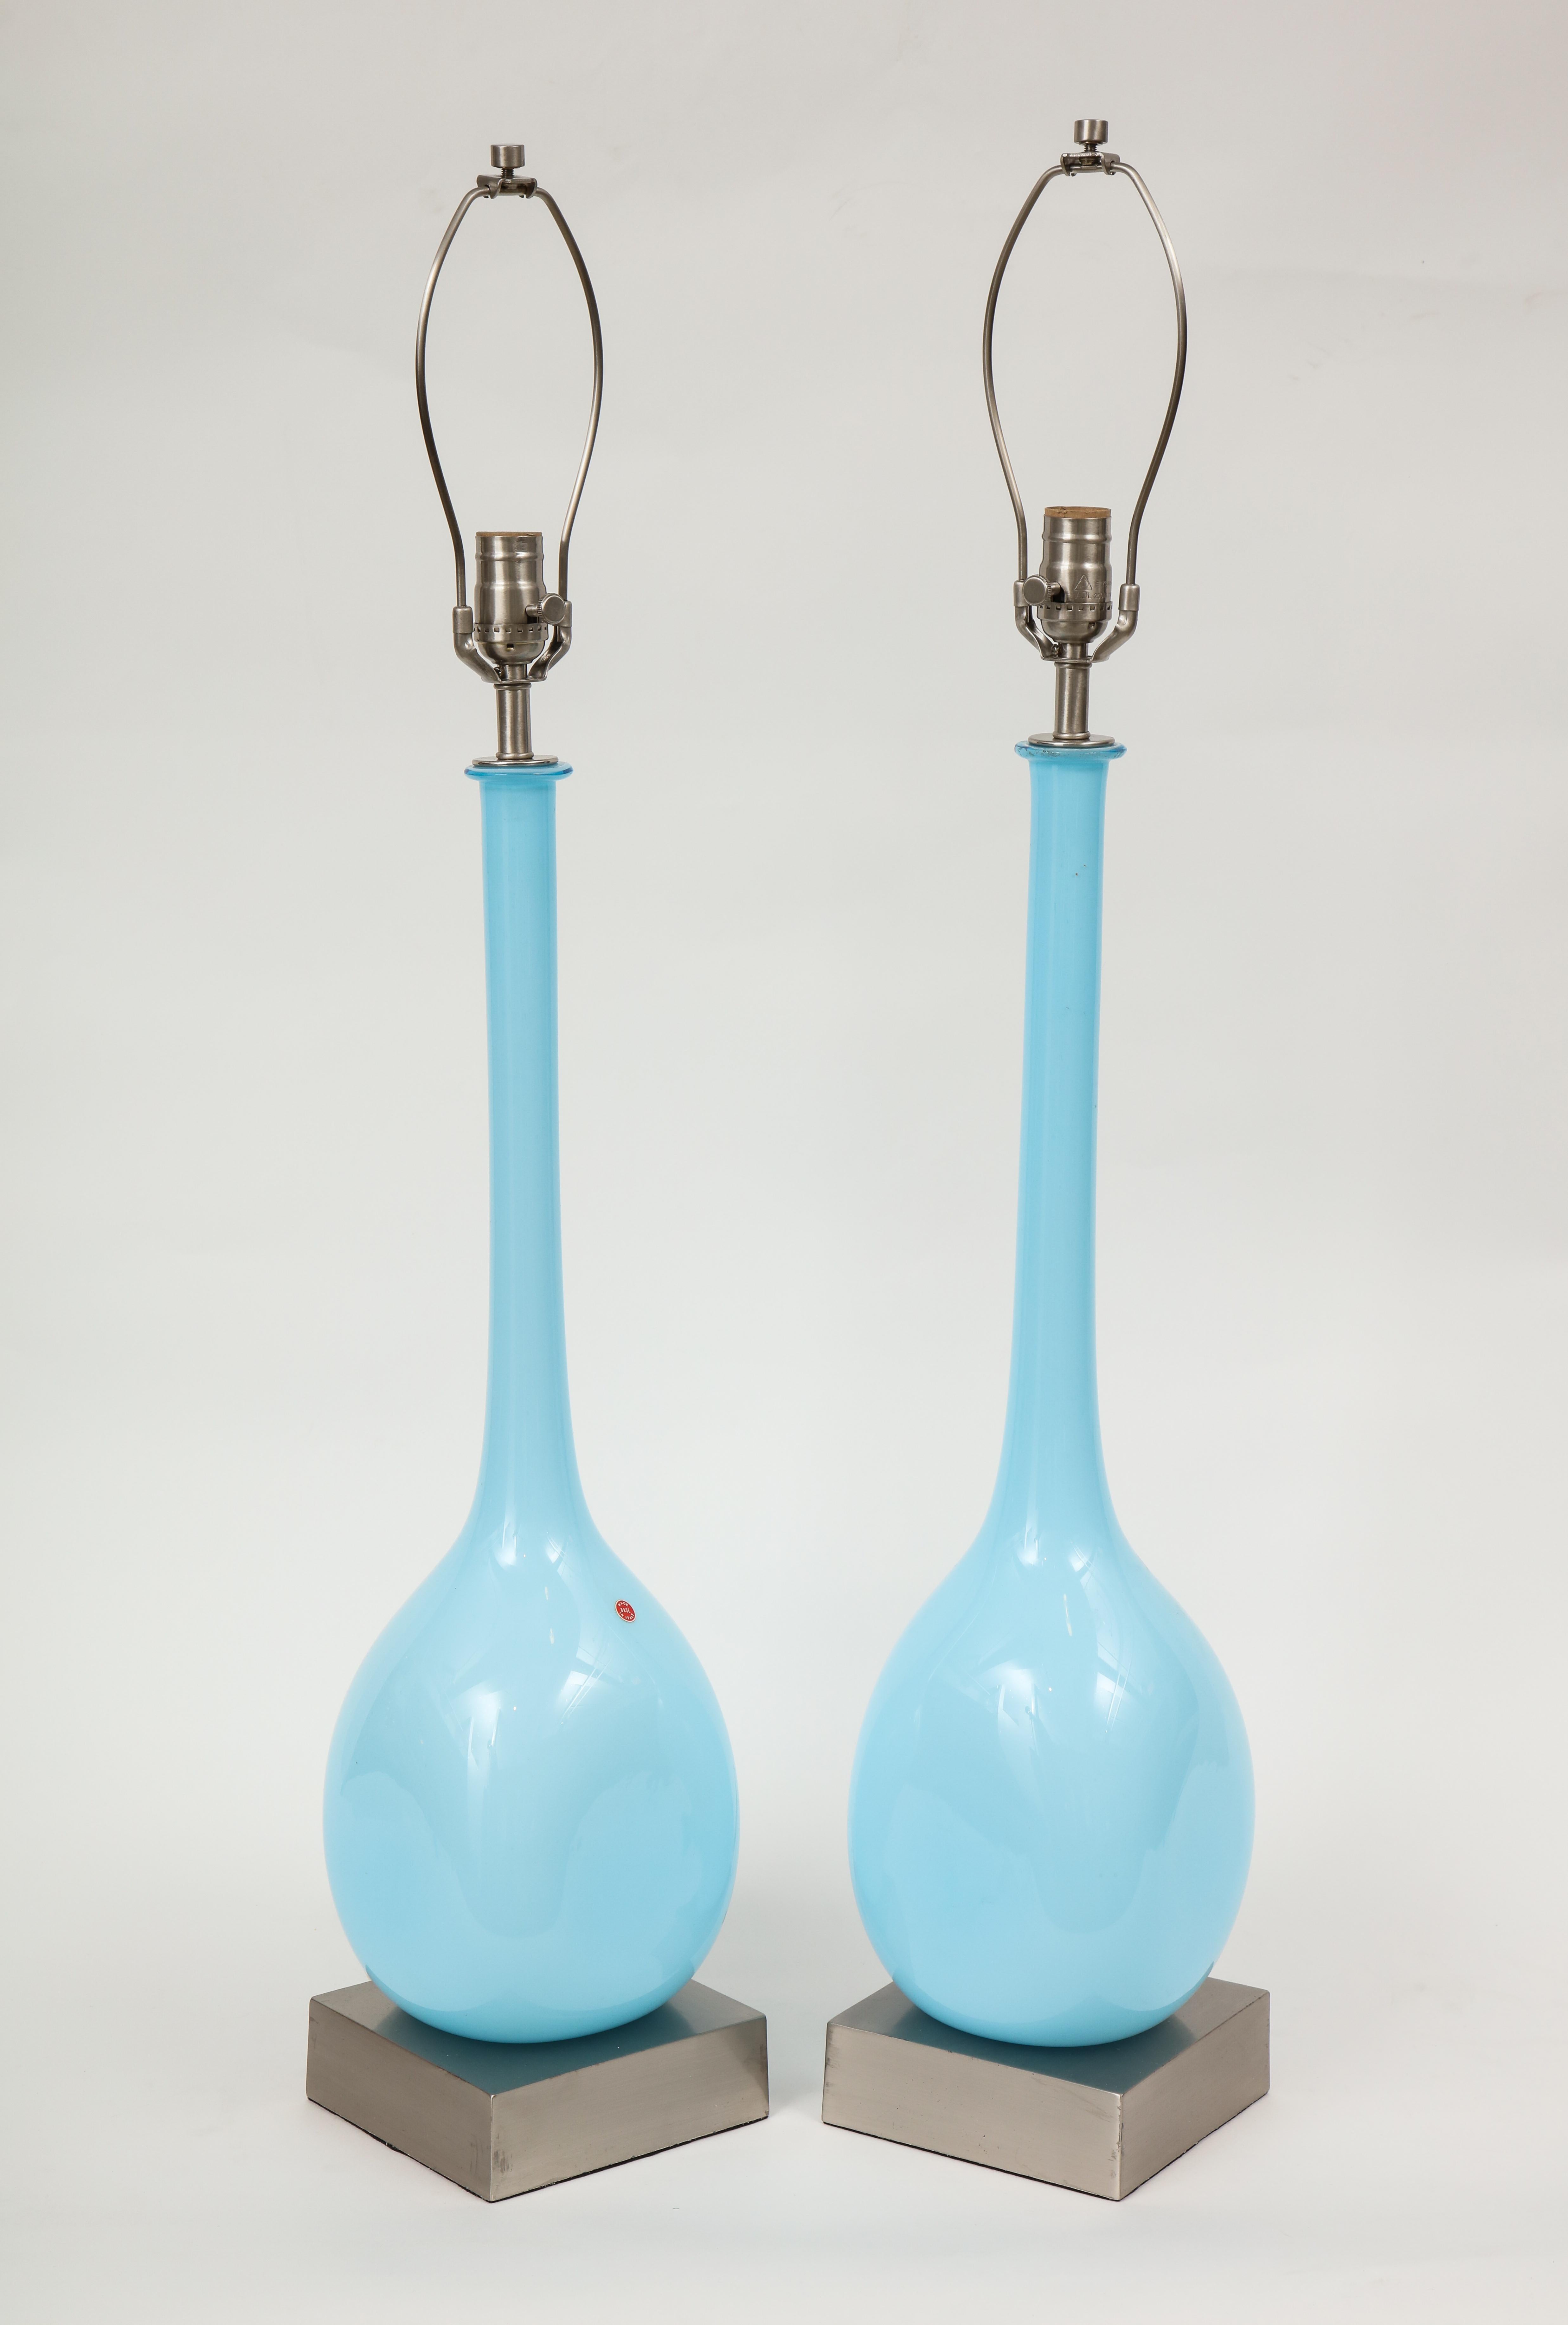 Pair of midcentury Murano glass lamps on satin nickel square platform bases. Rewired for use in the USA, 100W max.